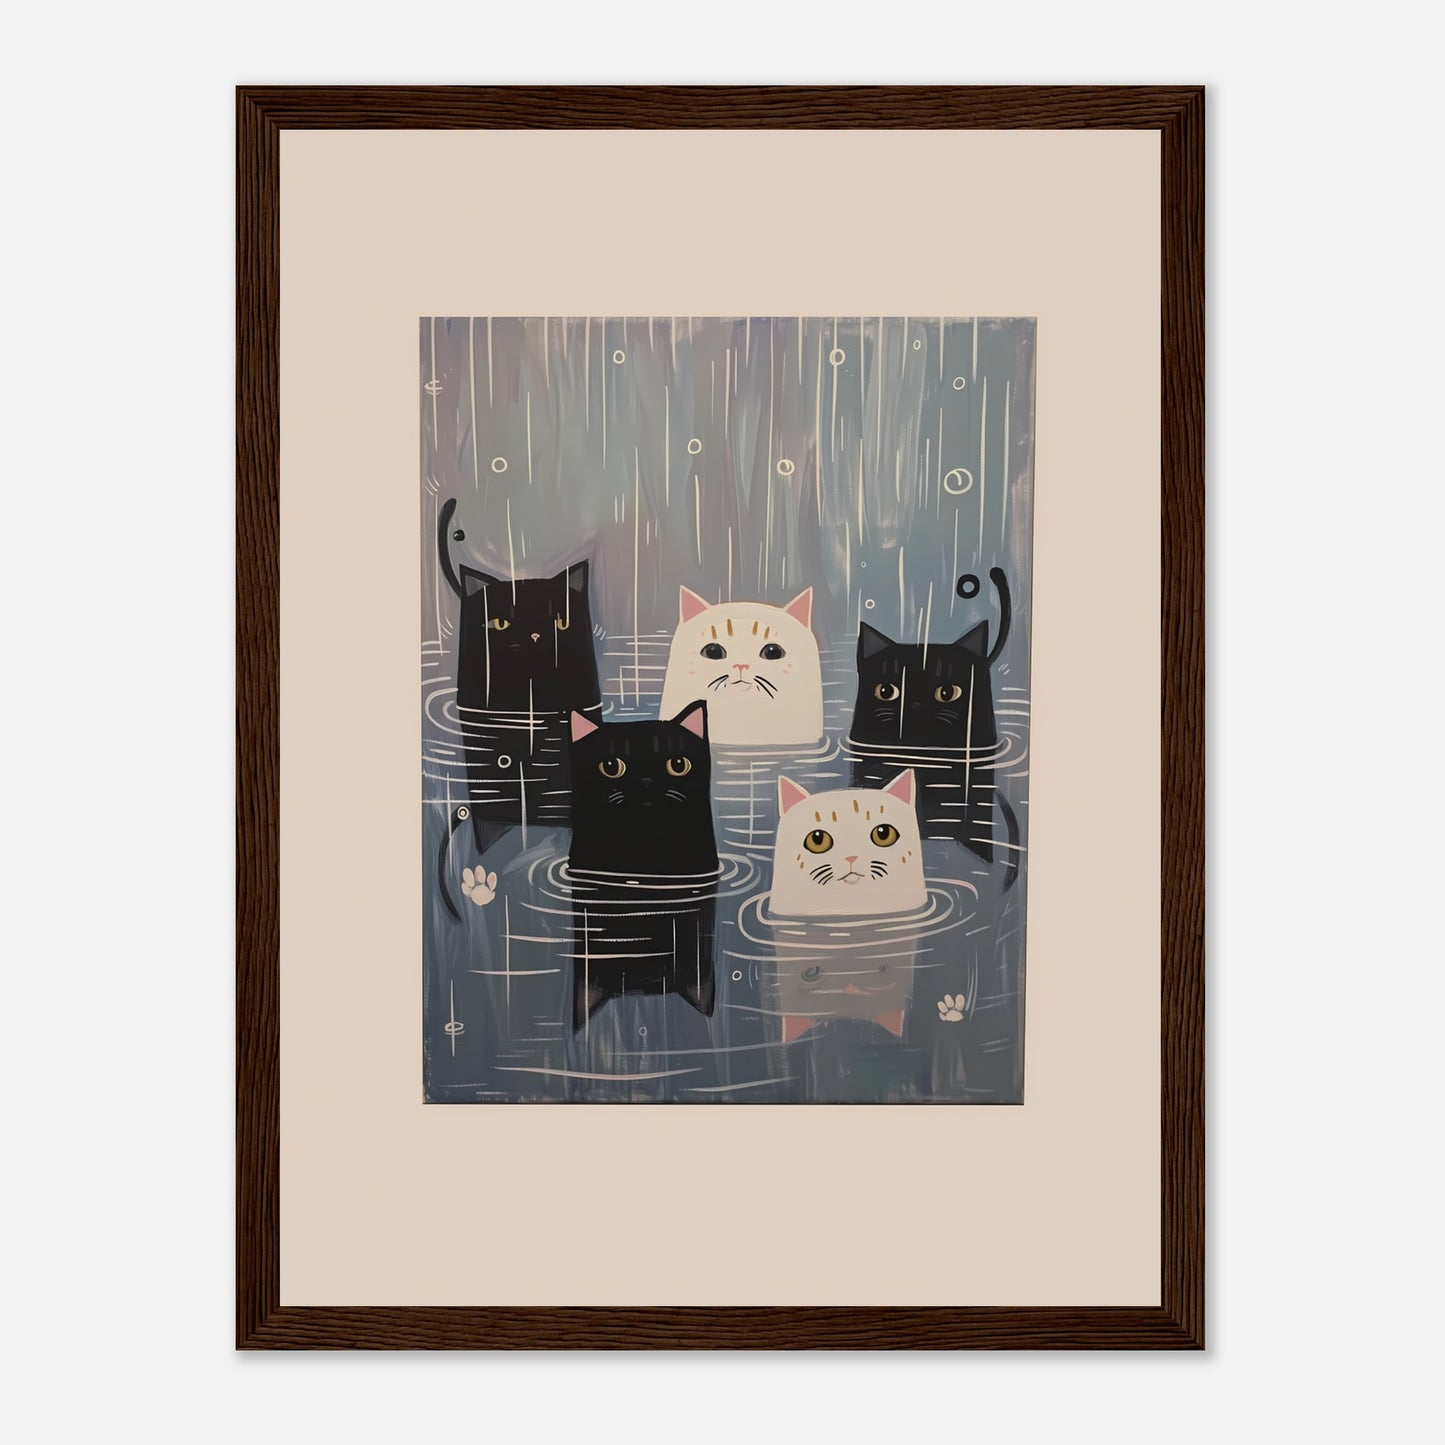 Illustration of four cartoon cats with different expressions standing in the rain, framed on a wall.